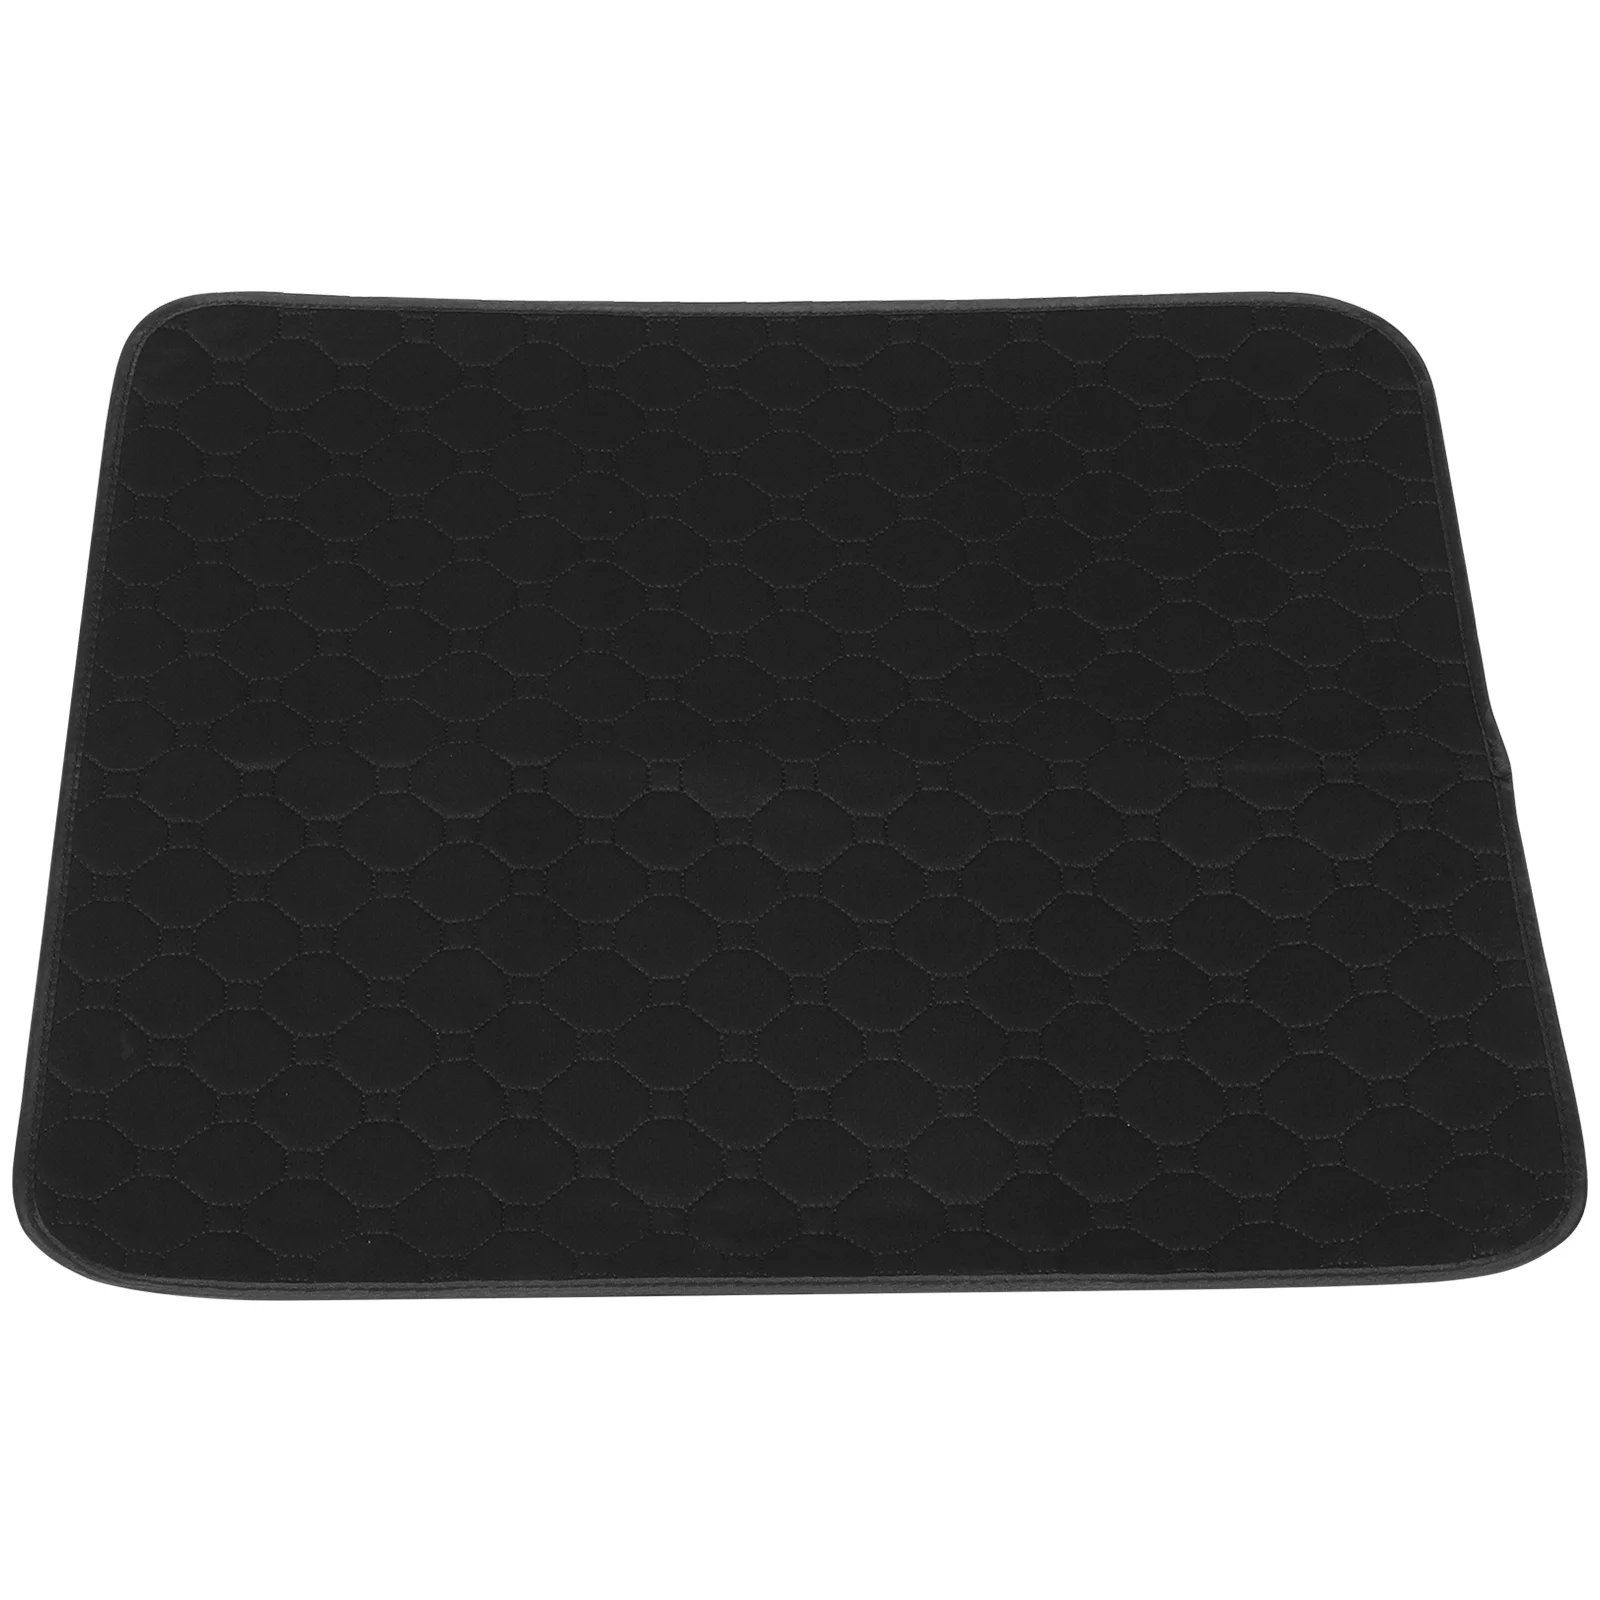 

Pad Car Absorbent Cover Chair Pads Cushion Squarenon Thinwaterproof Mat Incontinence Office Absorbing Pee Nonslip Home Seats